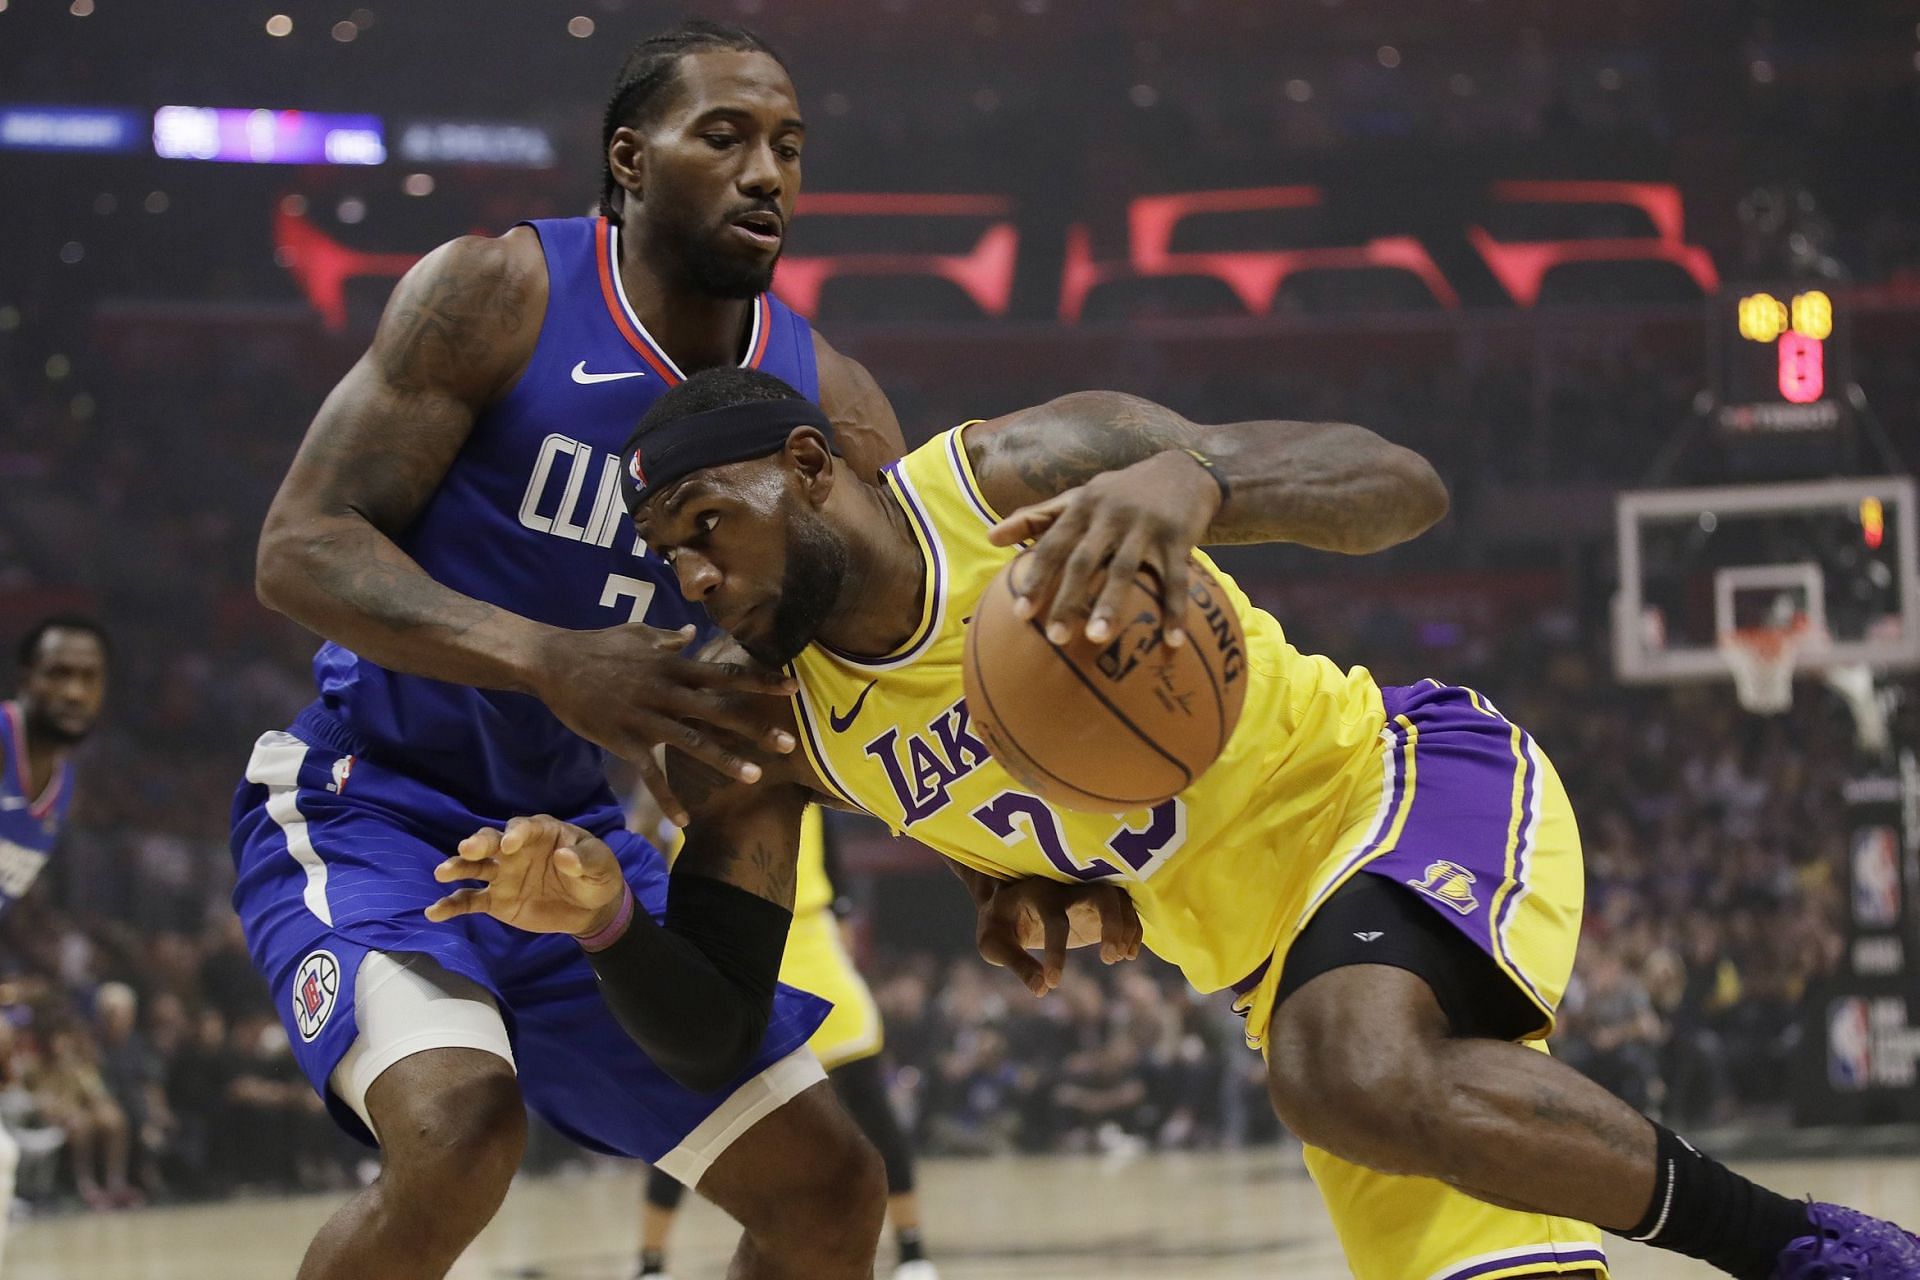 The star-studded LA Lakers are winless this season against the LA Clippers. [Photo: Bleacher Report]